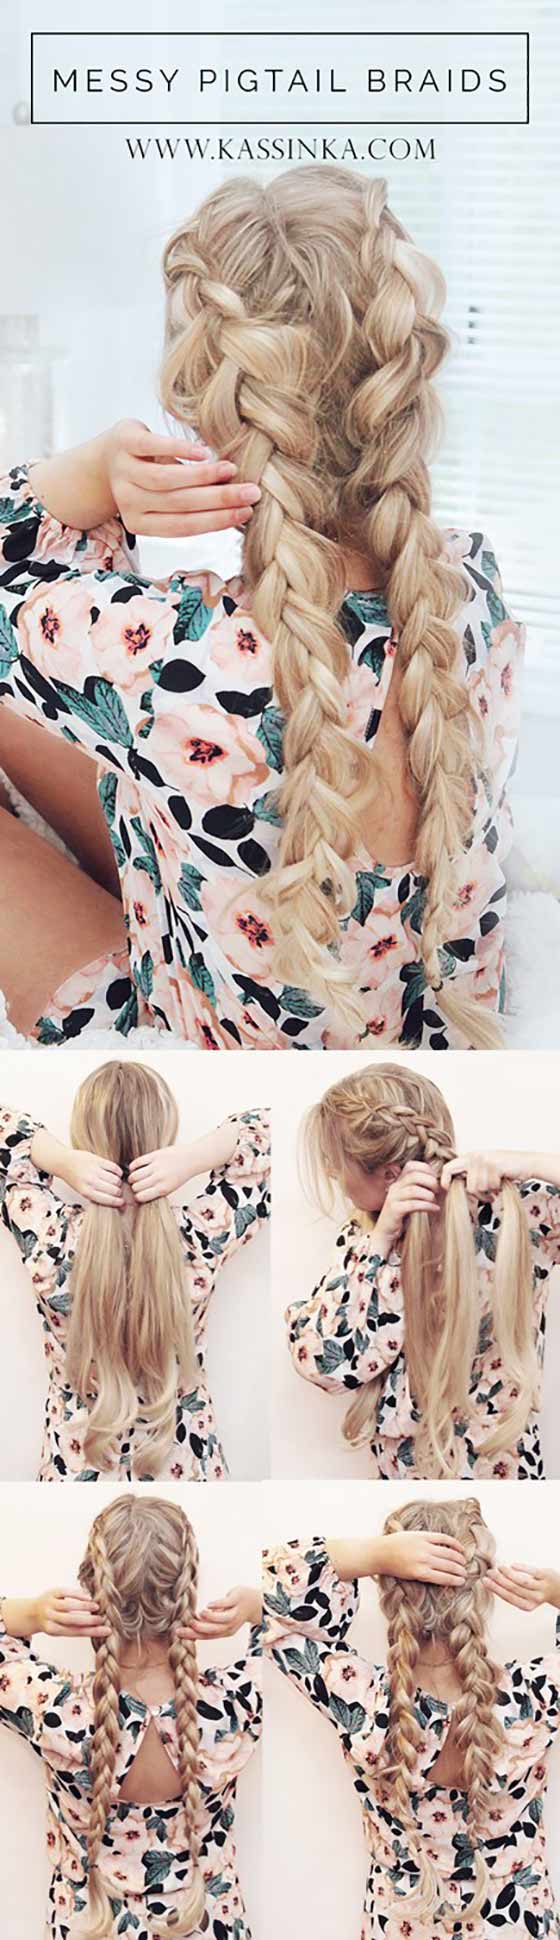 Messy pigtail braided hairstyle for long hair